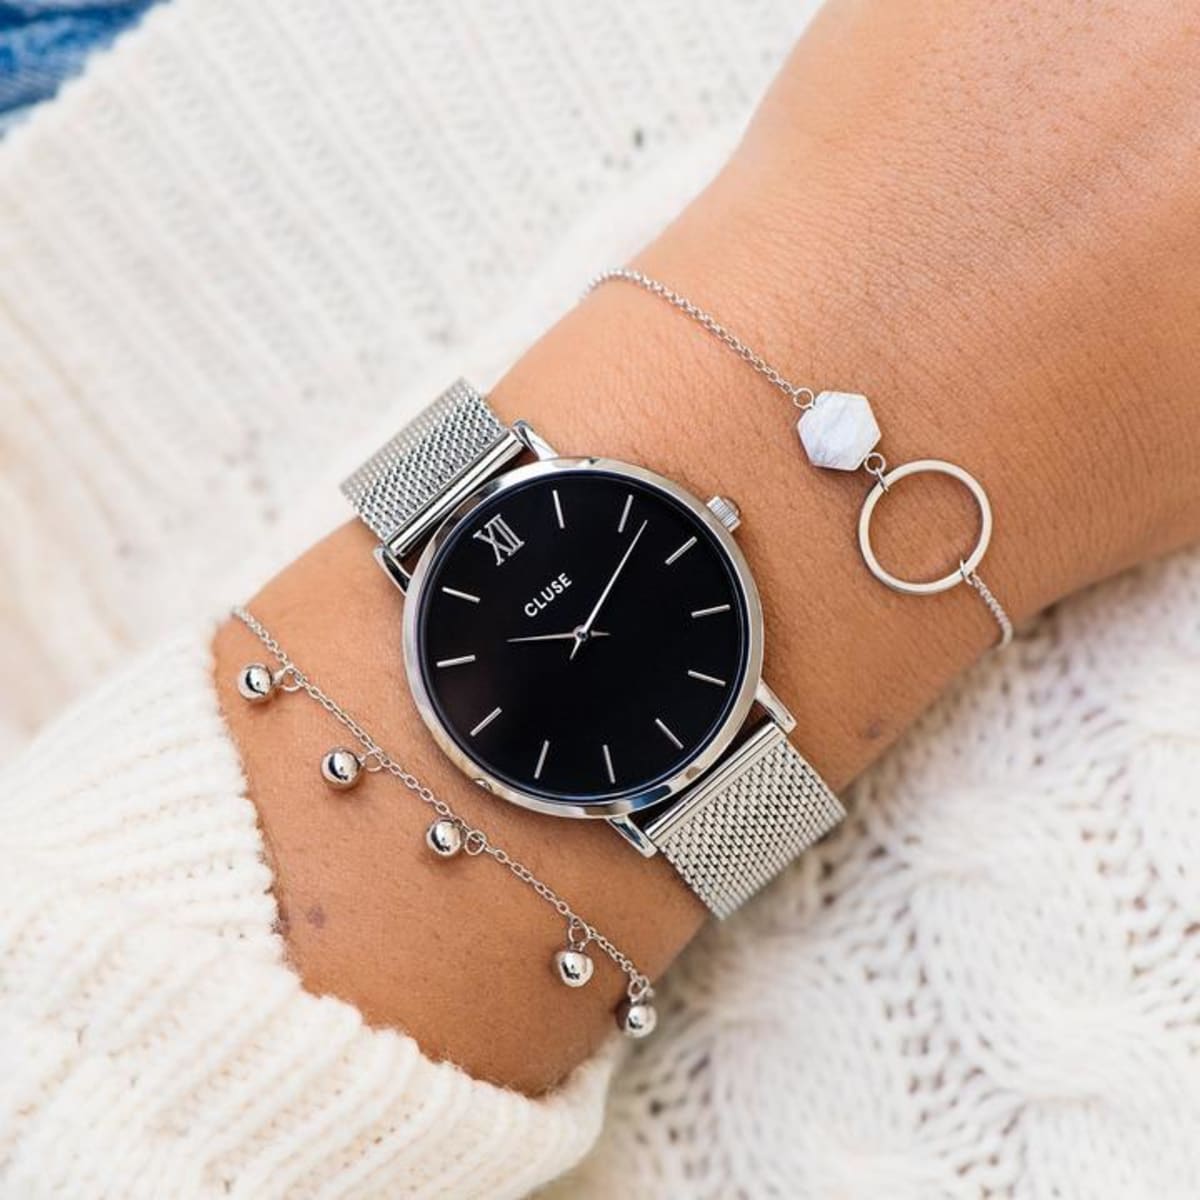 Our Minuit collection pays tribute to starry nights and elegant evening looks. The delicate design of this featherlight watch makes it the perfect accessory for a fashionable, yet subtle result. The watch features a 33 mm case, where black is combined with silver details to create a beautiful minimalist timepiece. The strap can be easily interchanged, allowing you to personalise your watch.